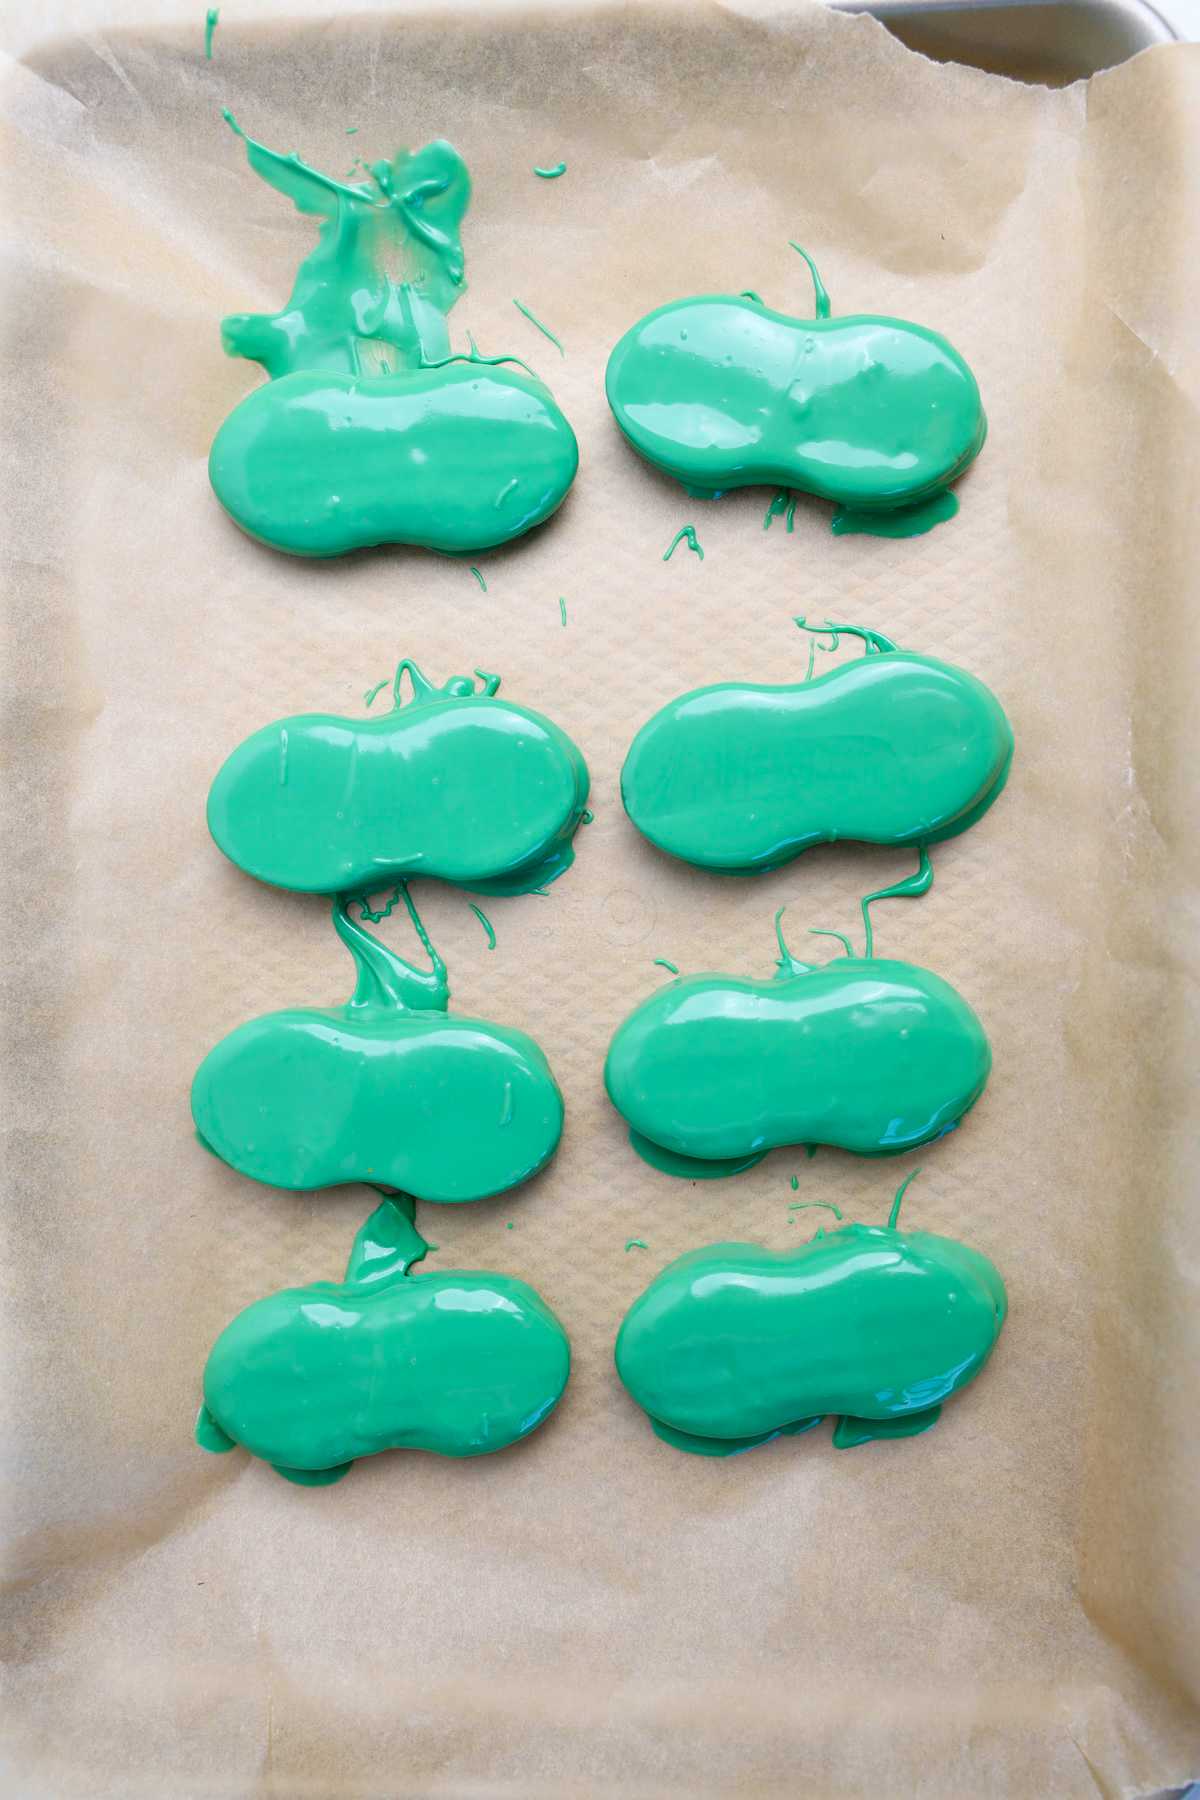 cookies coated in green chocolate